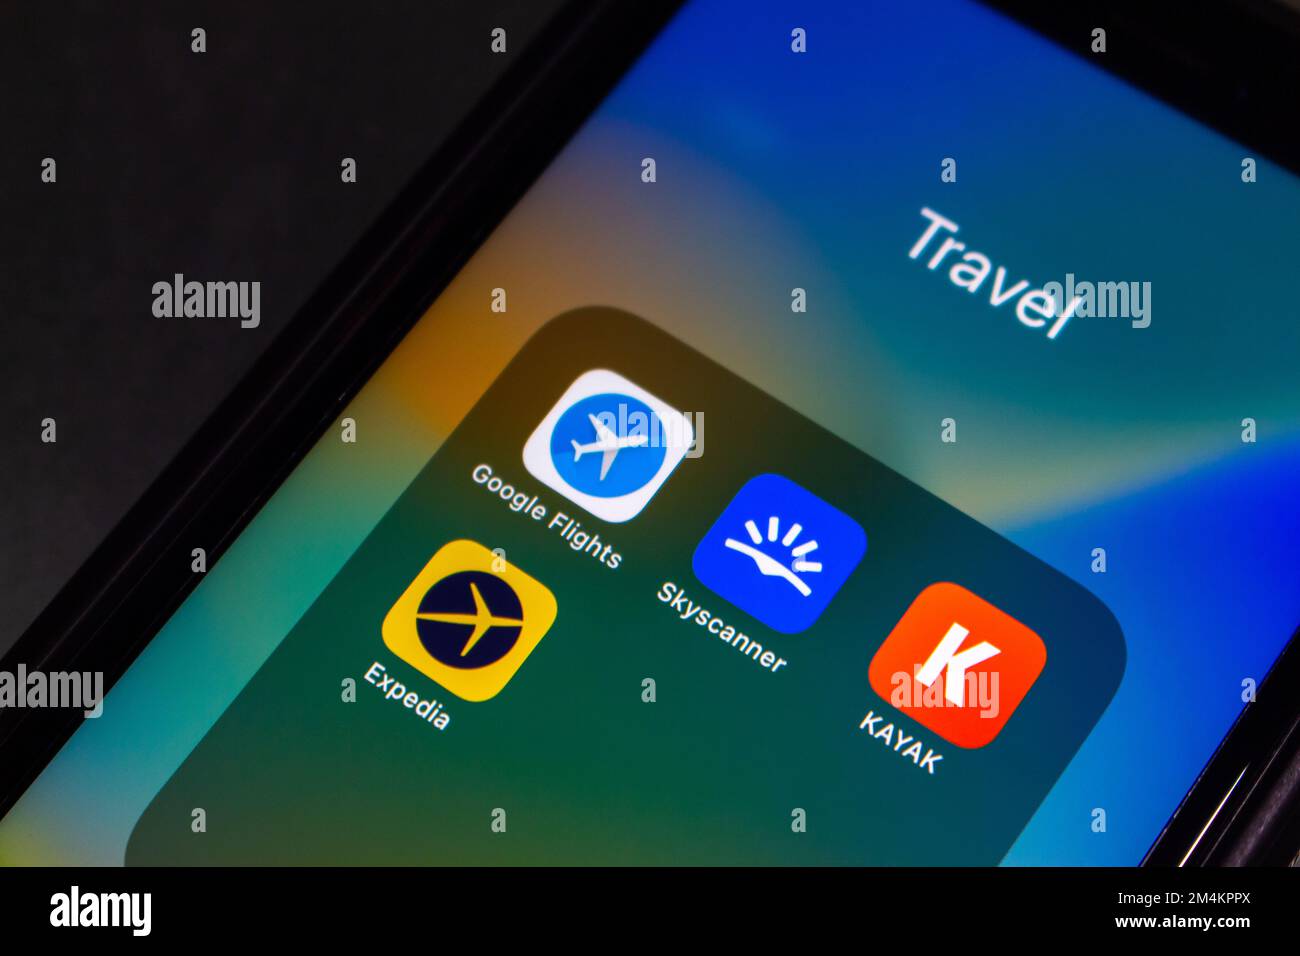 Google Flights, Skyscanner, KAYAK and Expedia icons seen in iPhone screen. An online flight booking search service and travel technology concept Stock Photo